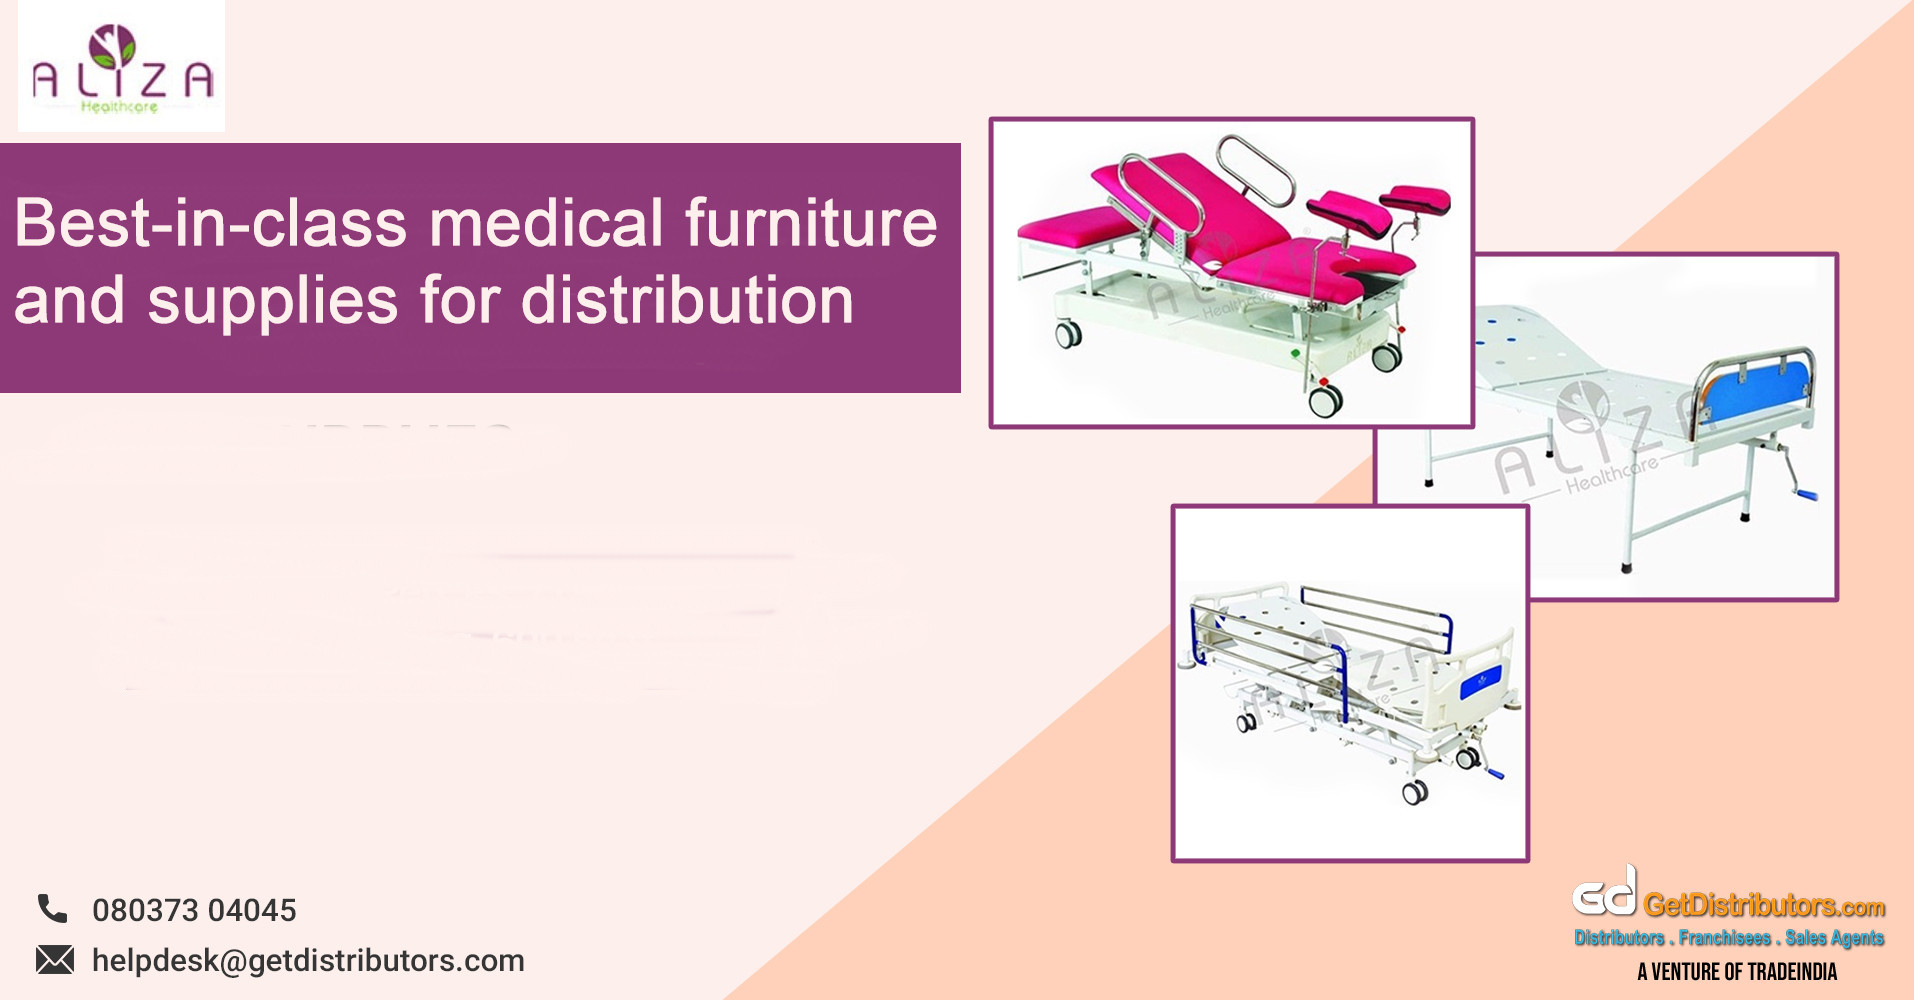 Best-in-class medical furniture and supplies for distribution